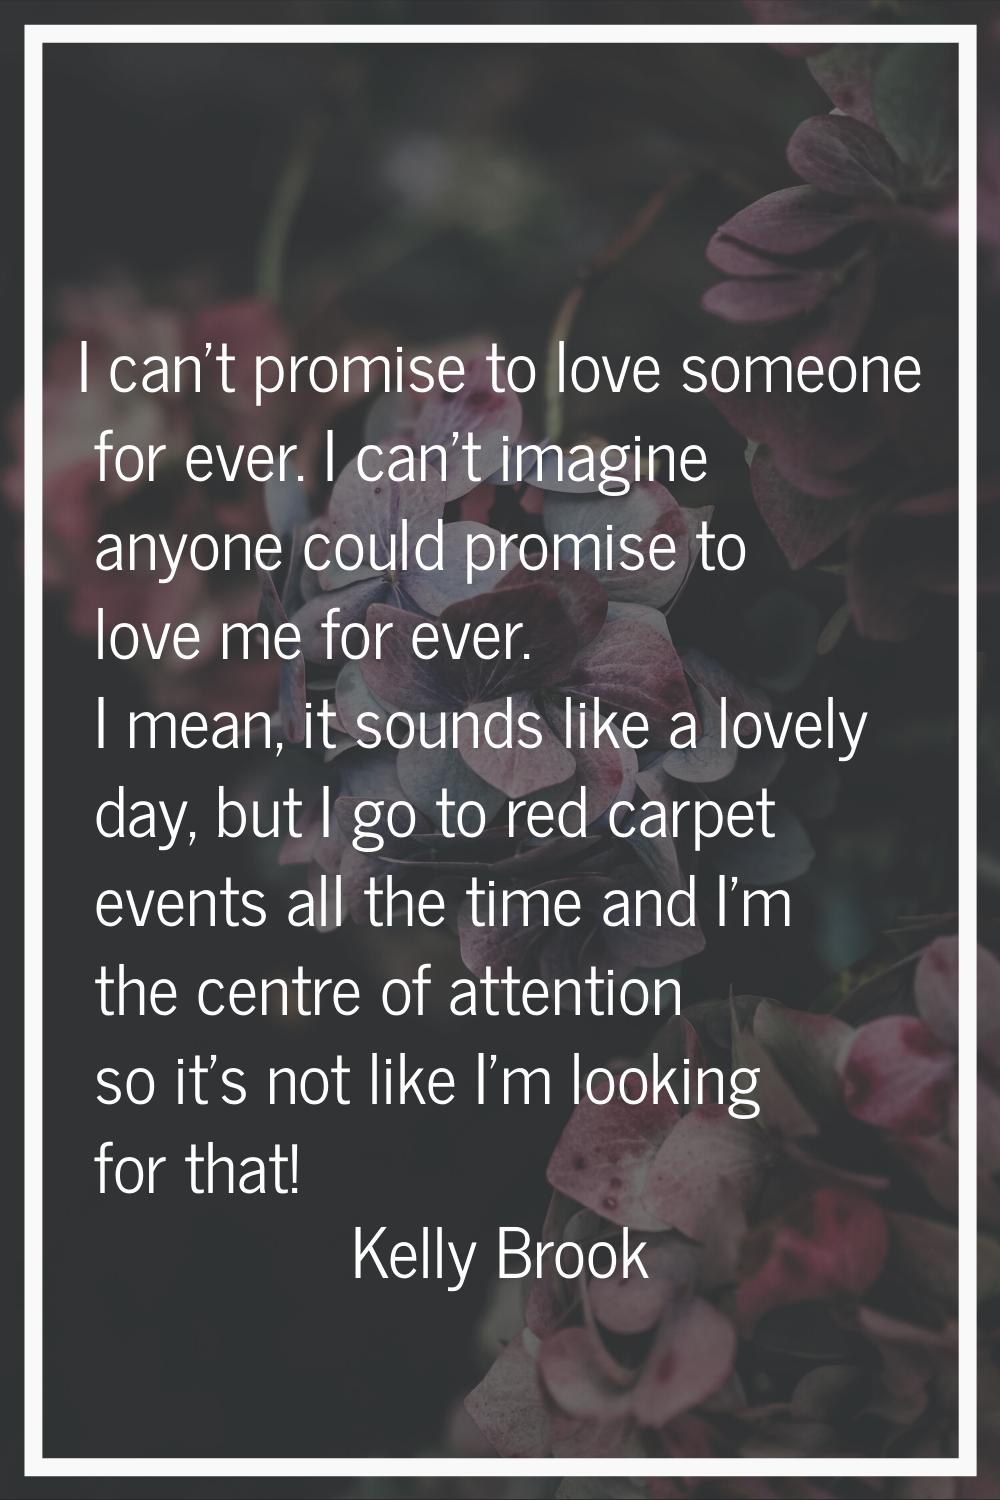 I can't promise to love someone for ever. I can't imagine anyone could promise to love me for ever.